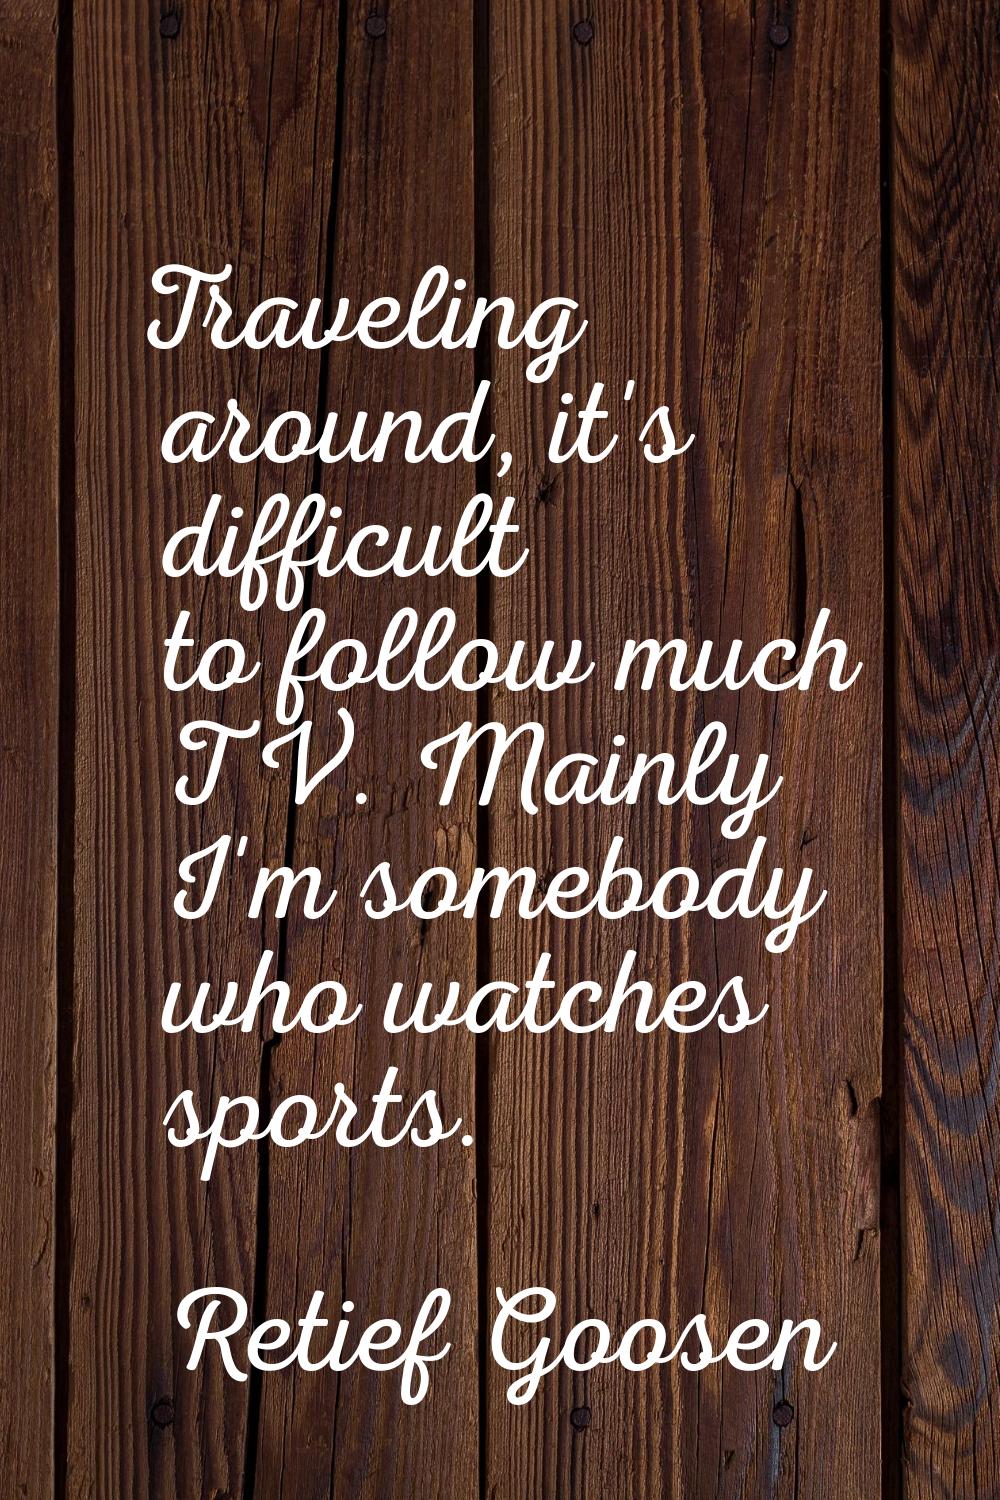 Traveling around, it's difficult to follow much TV. Mainly I'm somebody who watches sports.